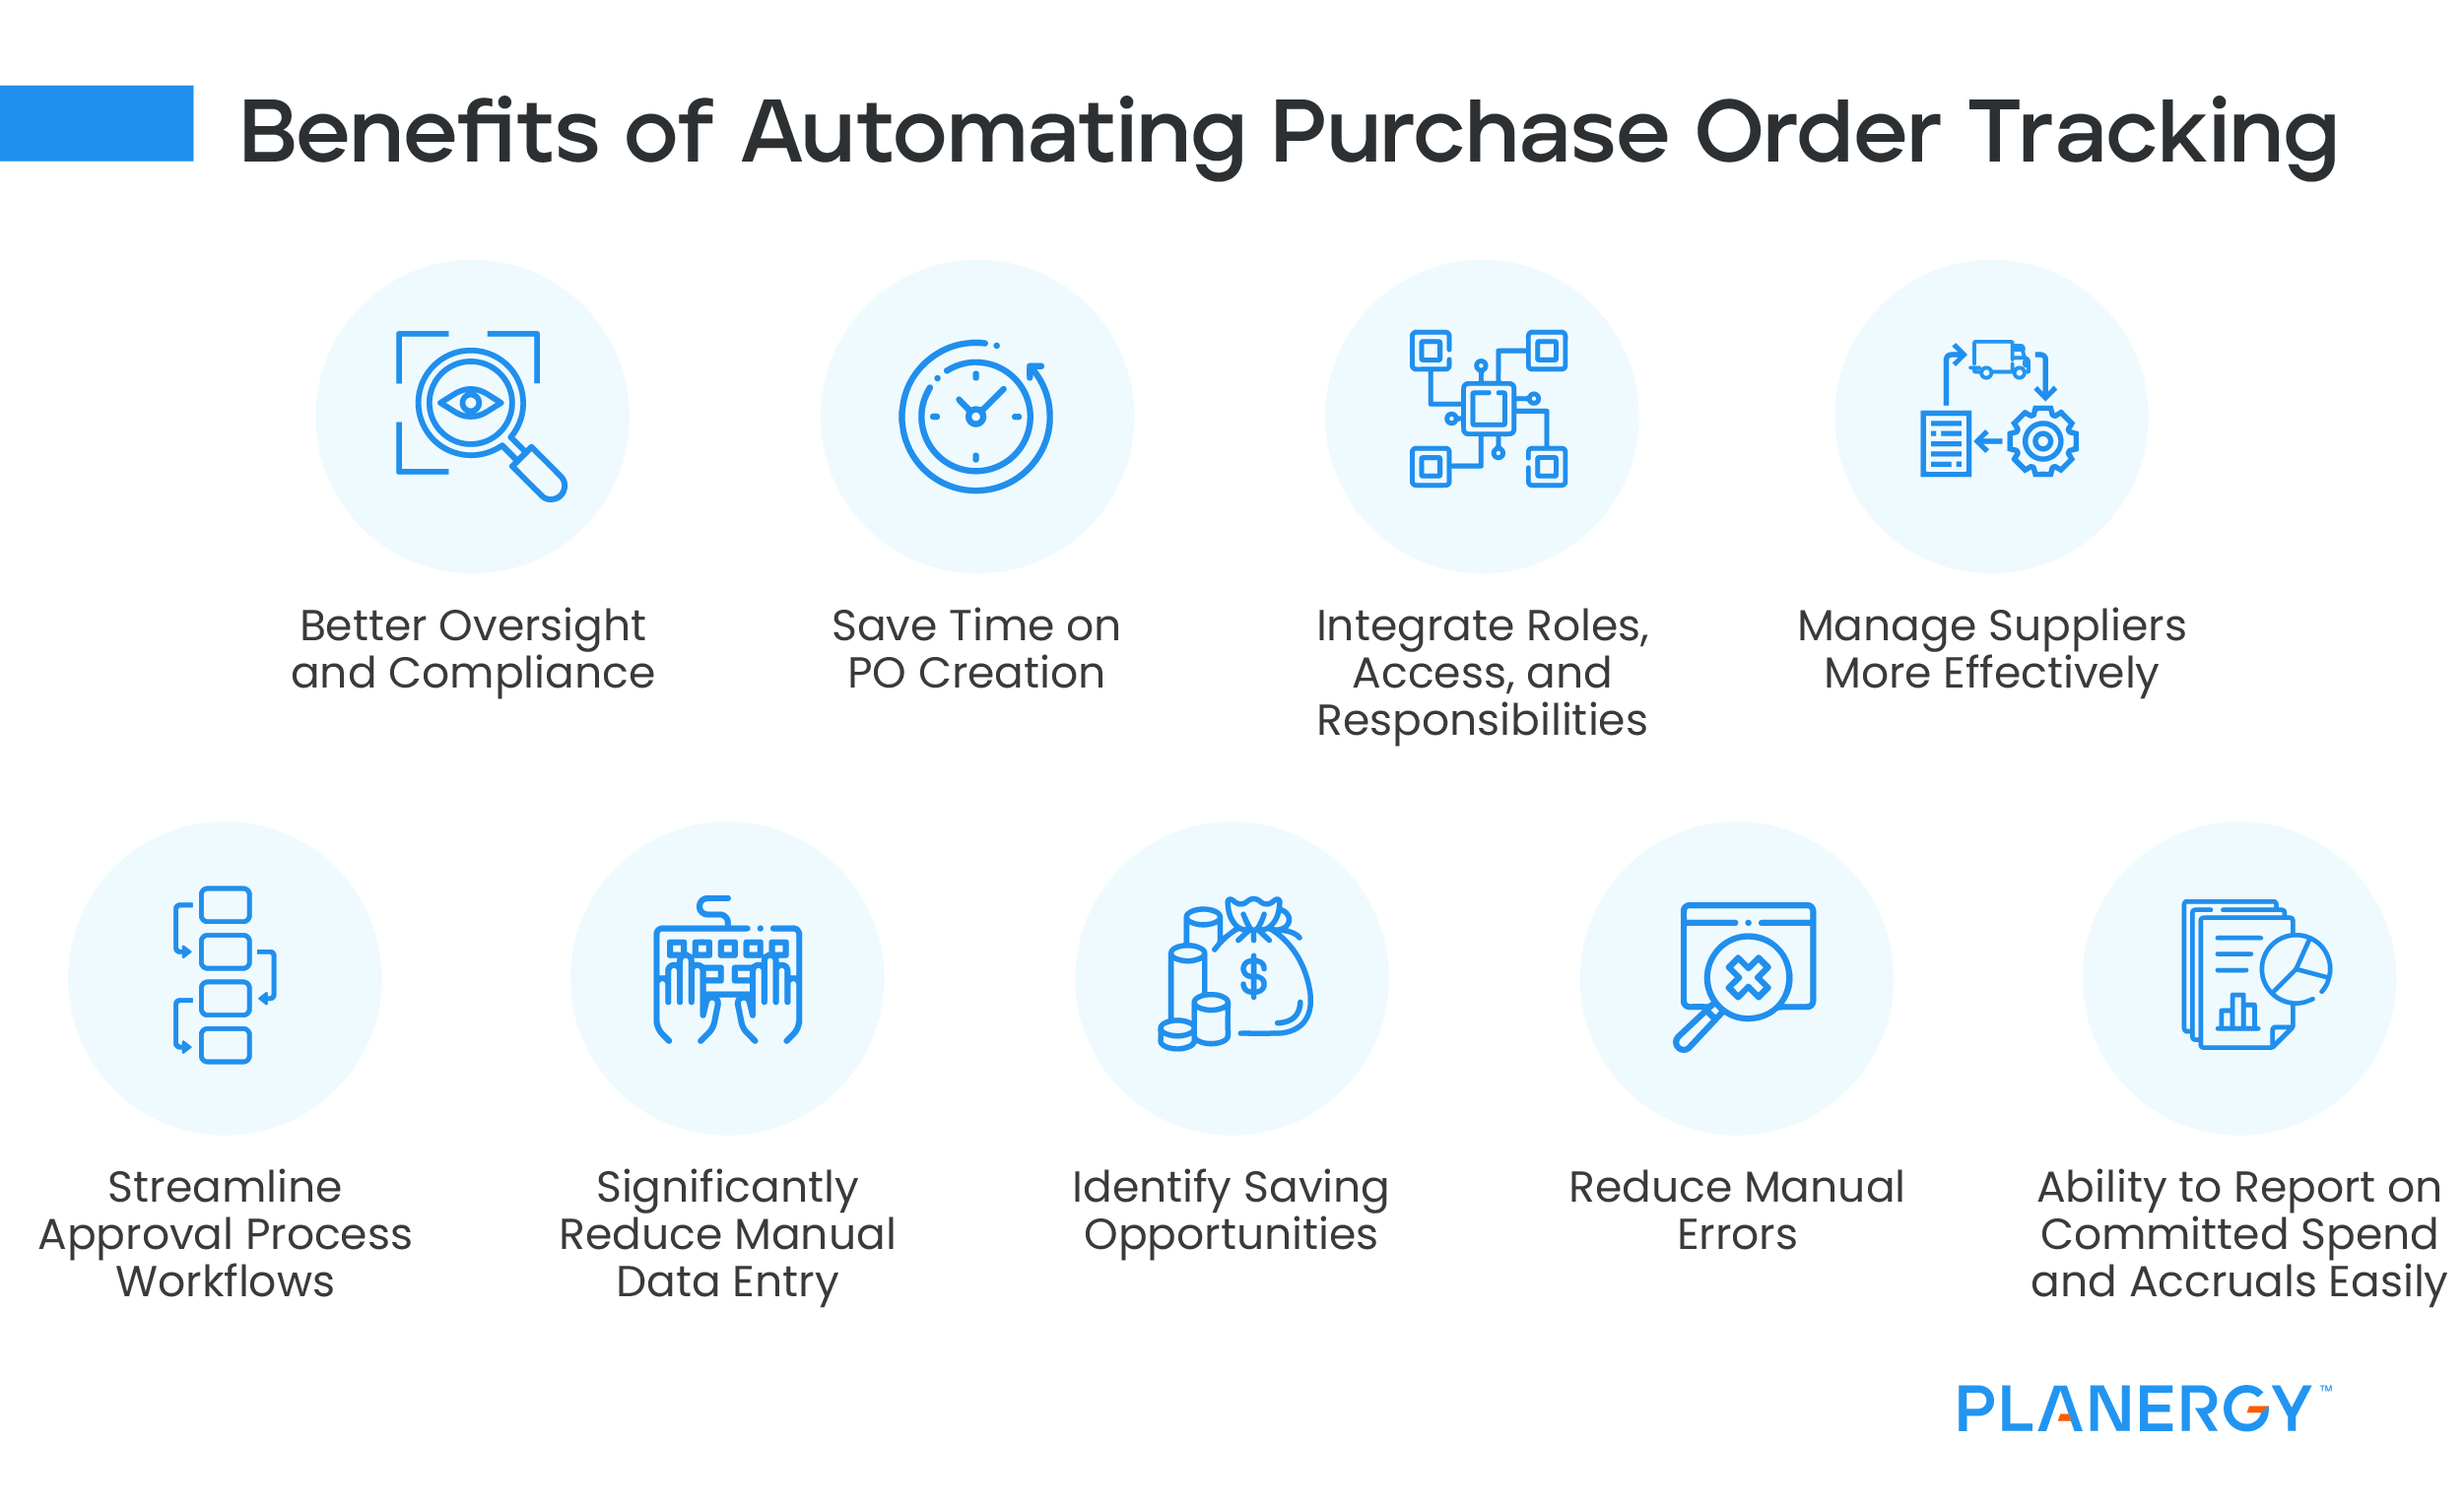 Benefits of Automated Purchase Order Tracking